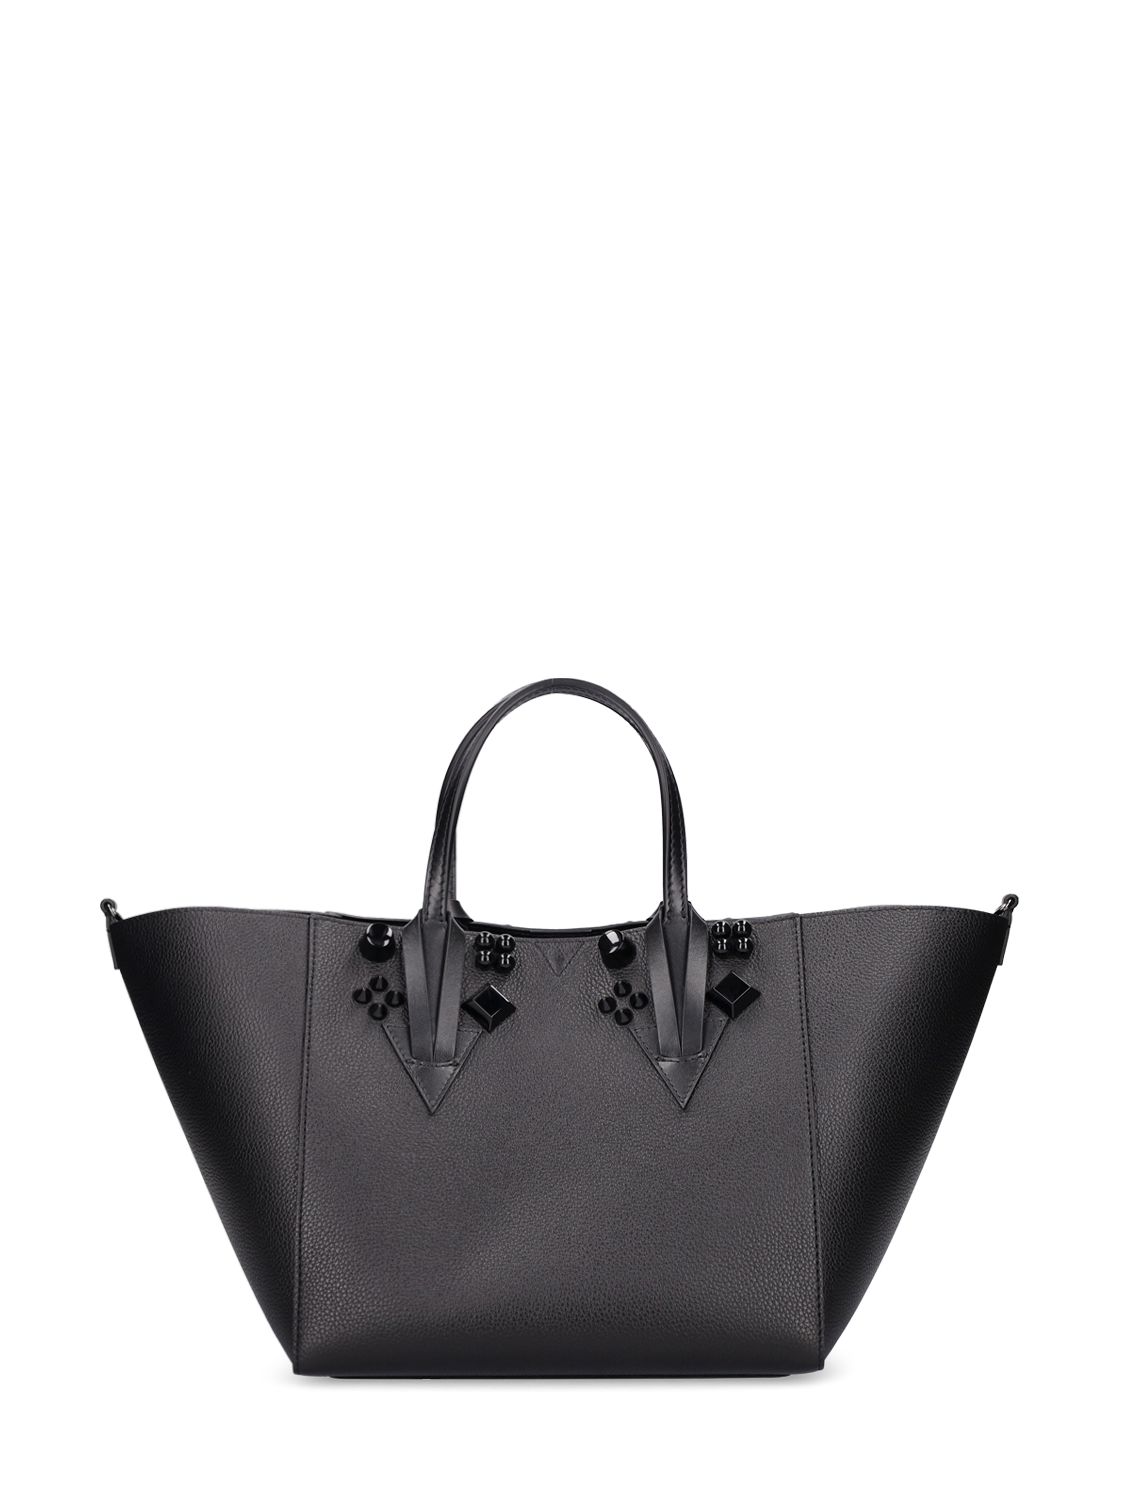 Cabachic Small Leather Tote Bag